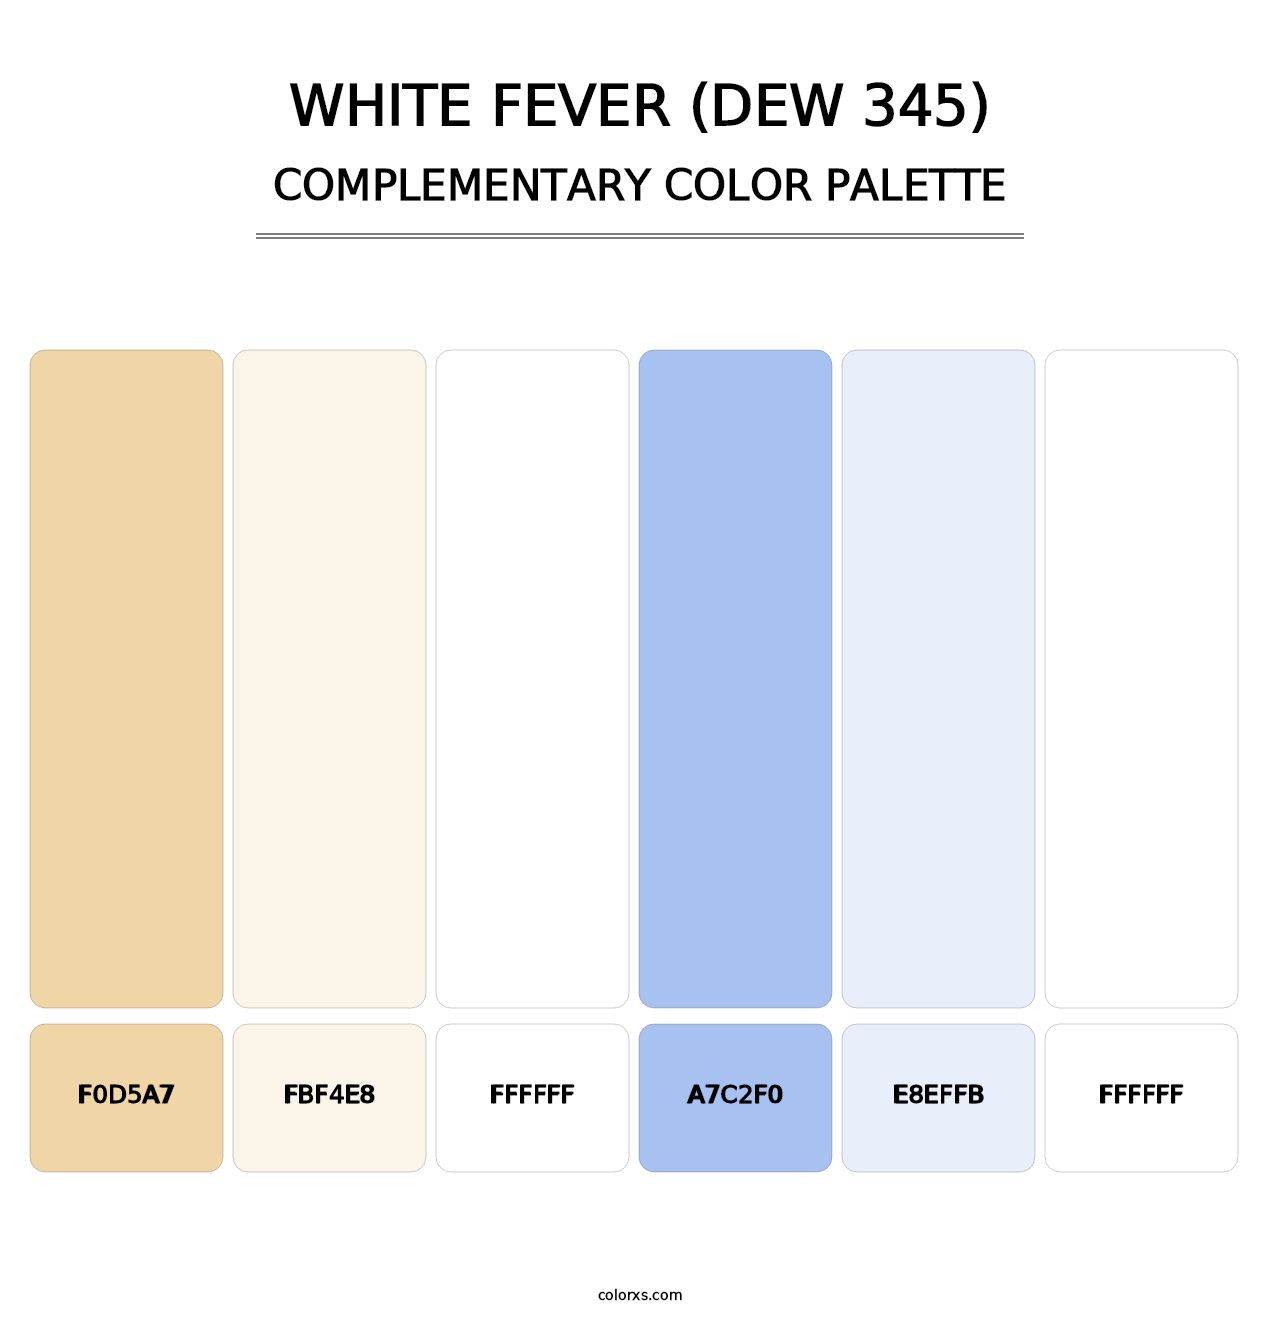 White Fever (DEW 345) - Complementary Color Palette